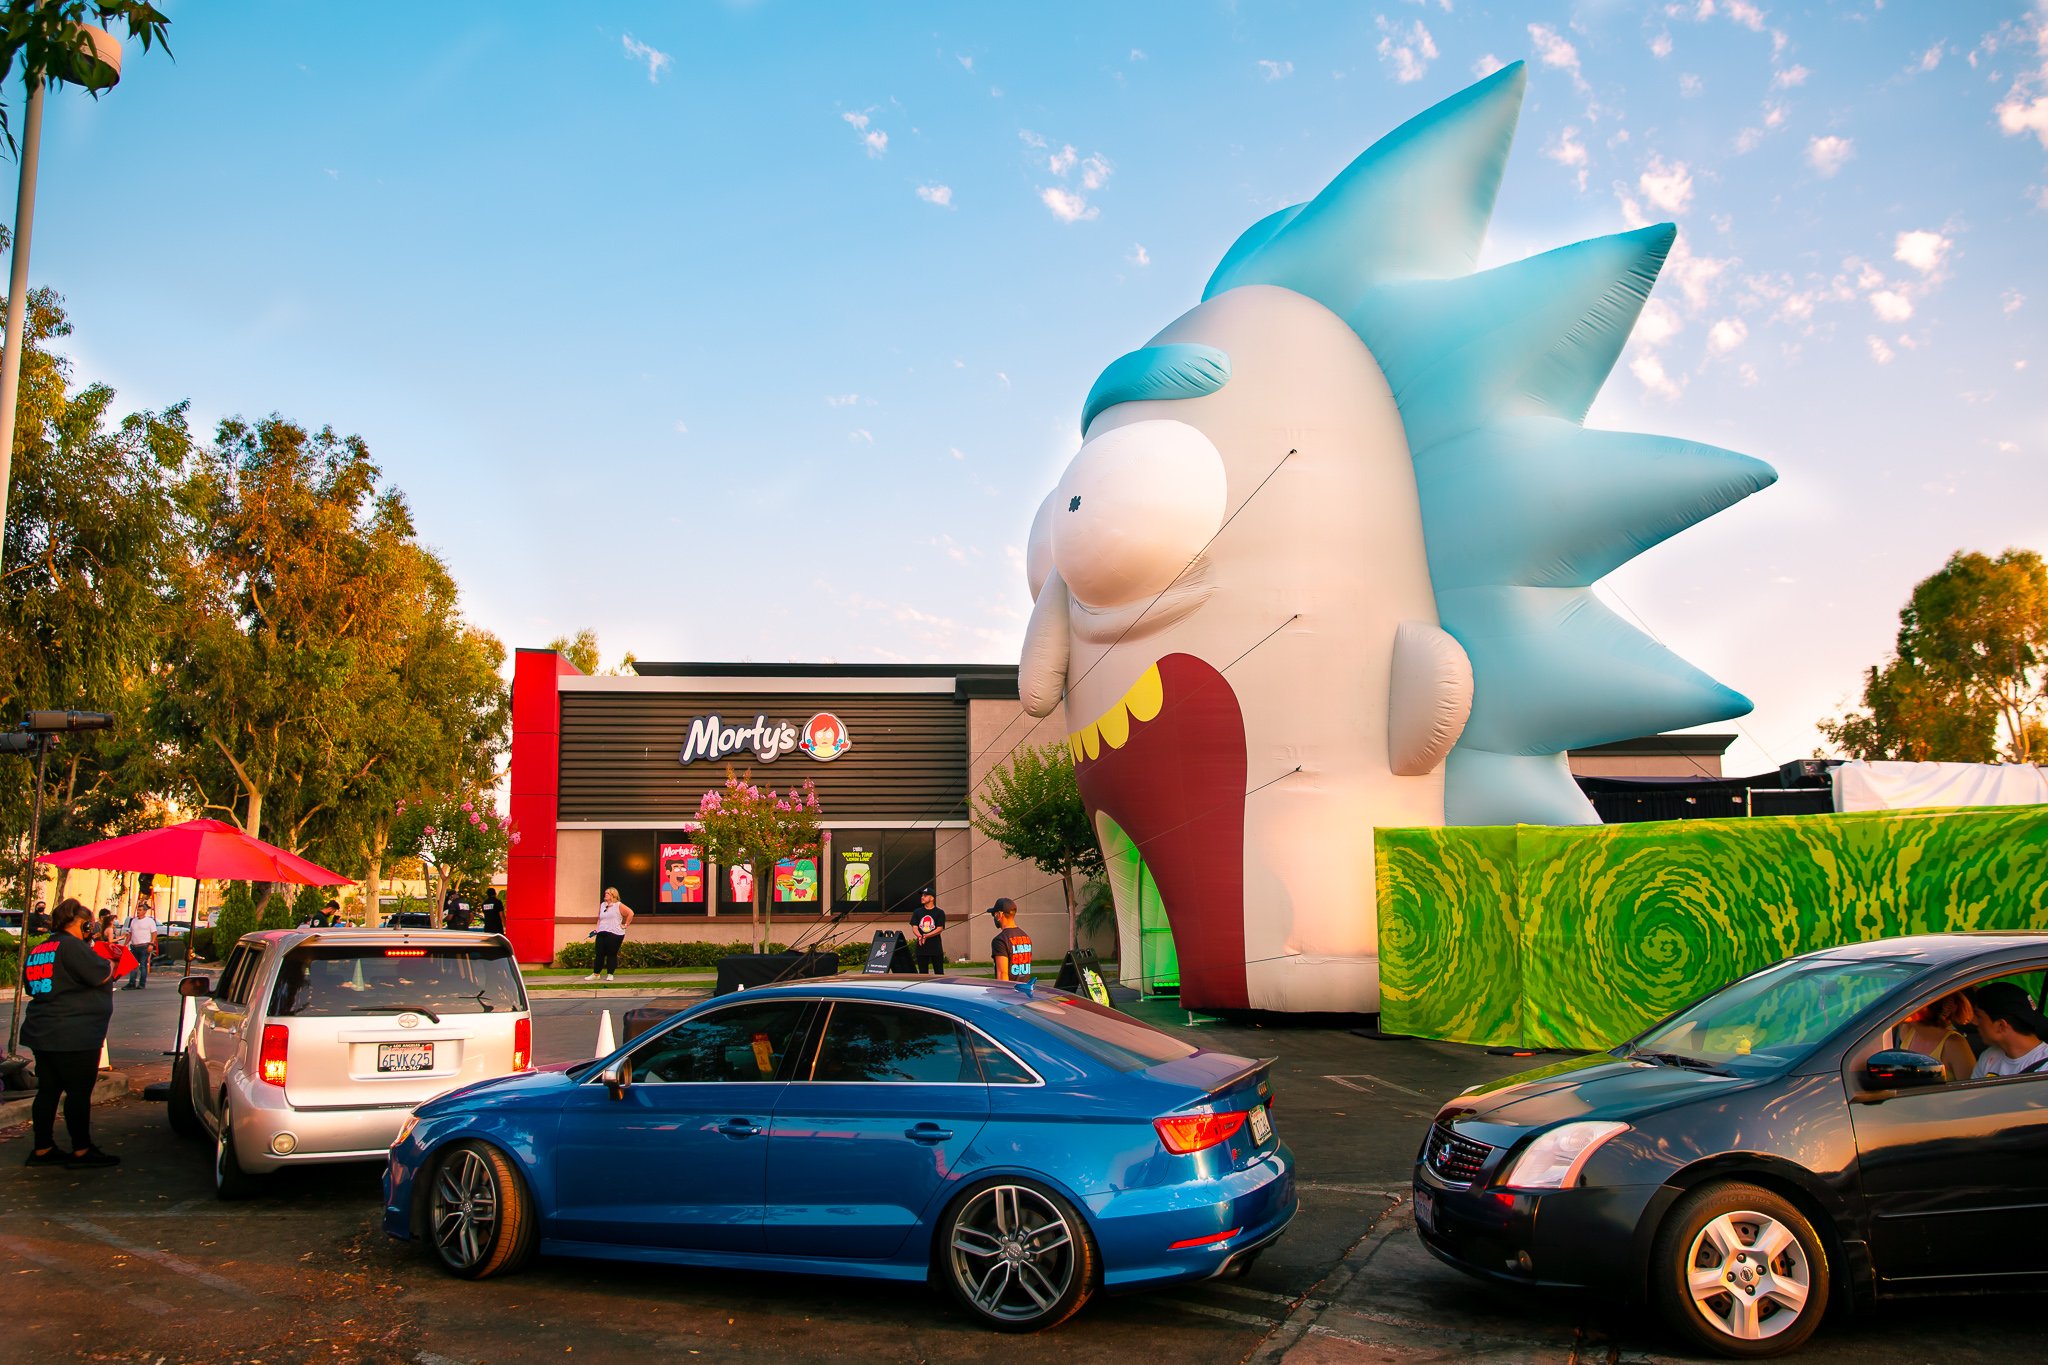 Rick and morty wendy's restaurante